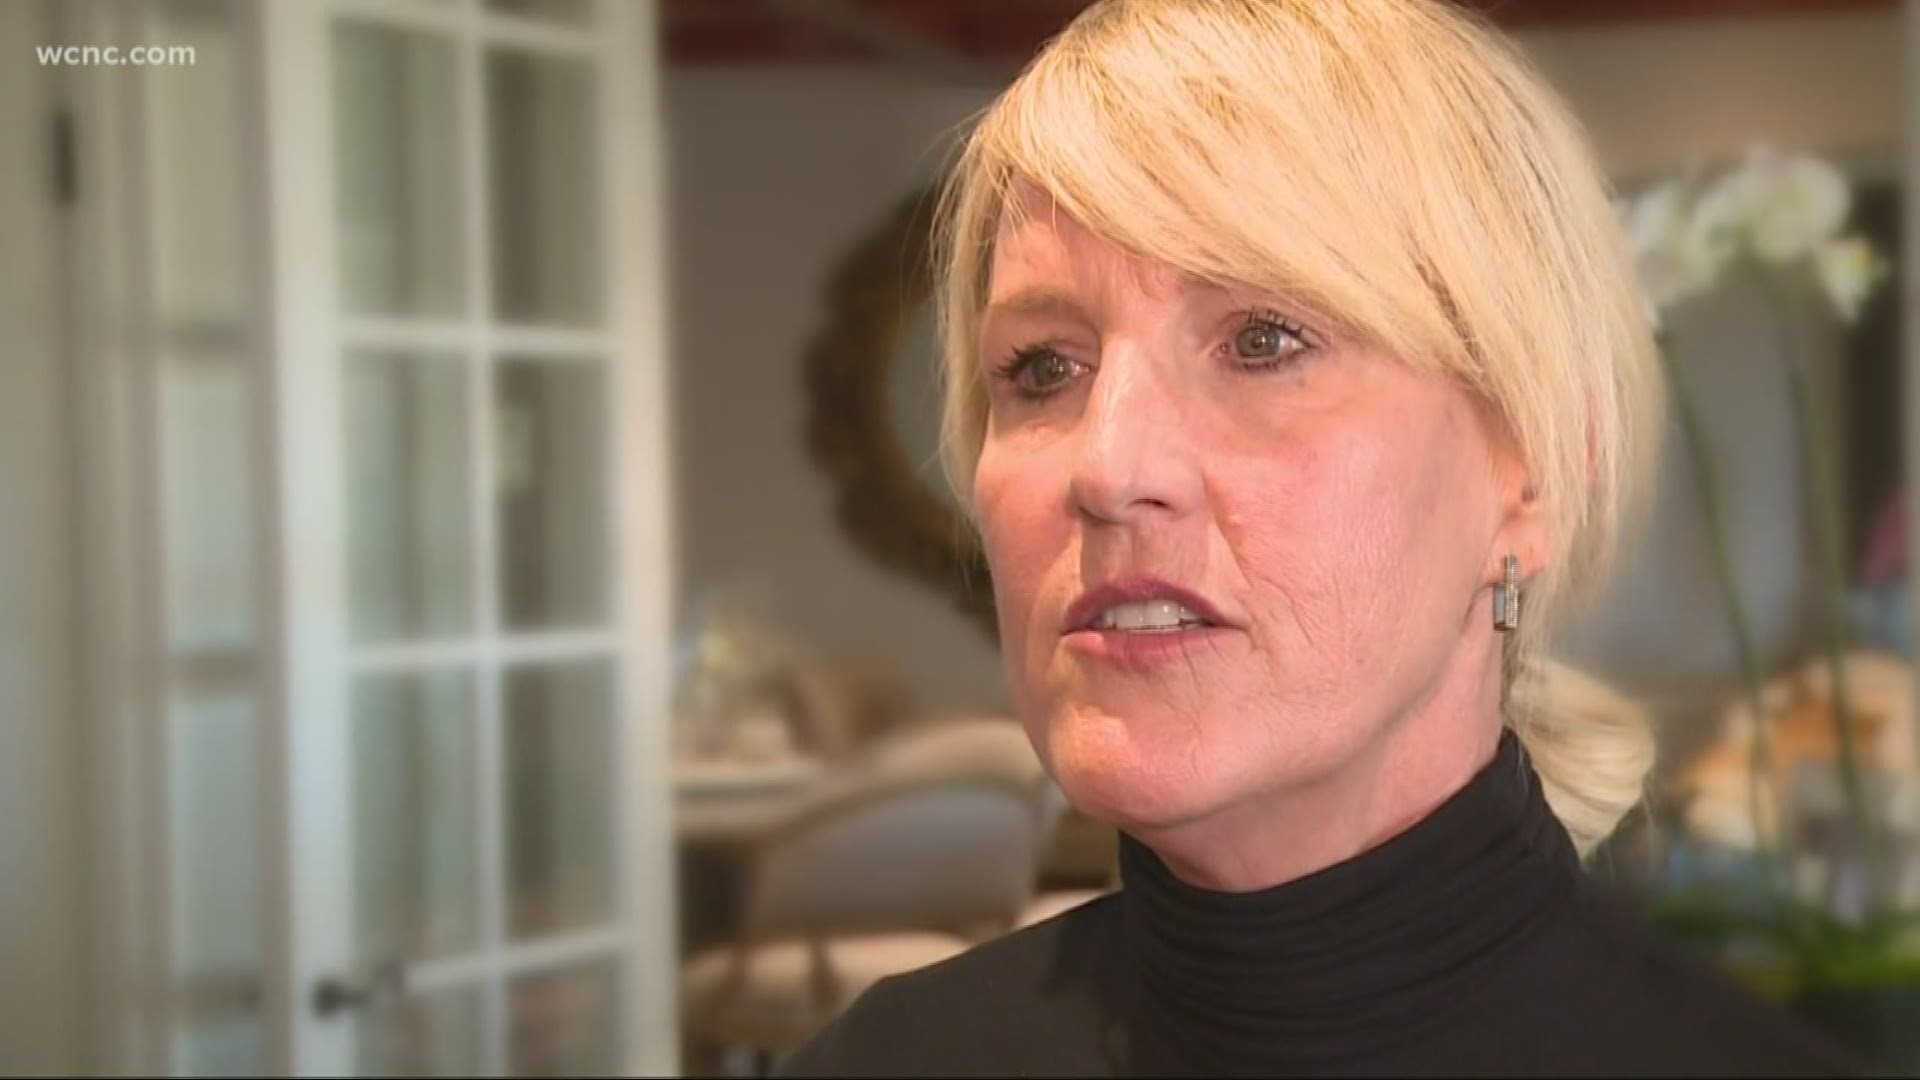 Environmental activist Erin Brockovich says Duke Energy needs to do more testing about the reported cancer clusters around Lake Norman.